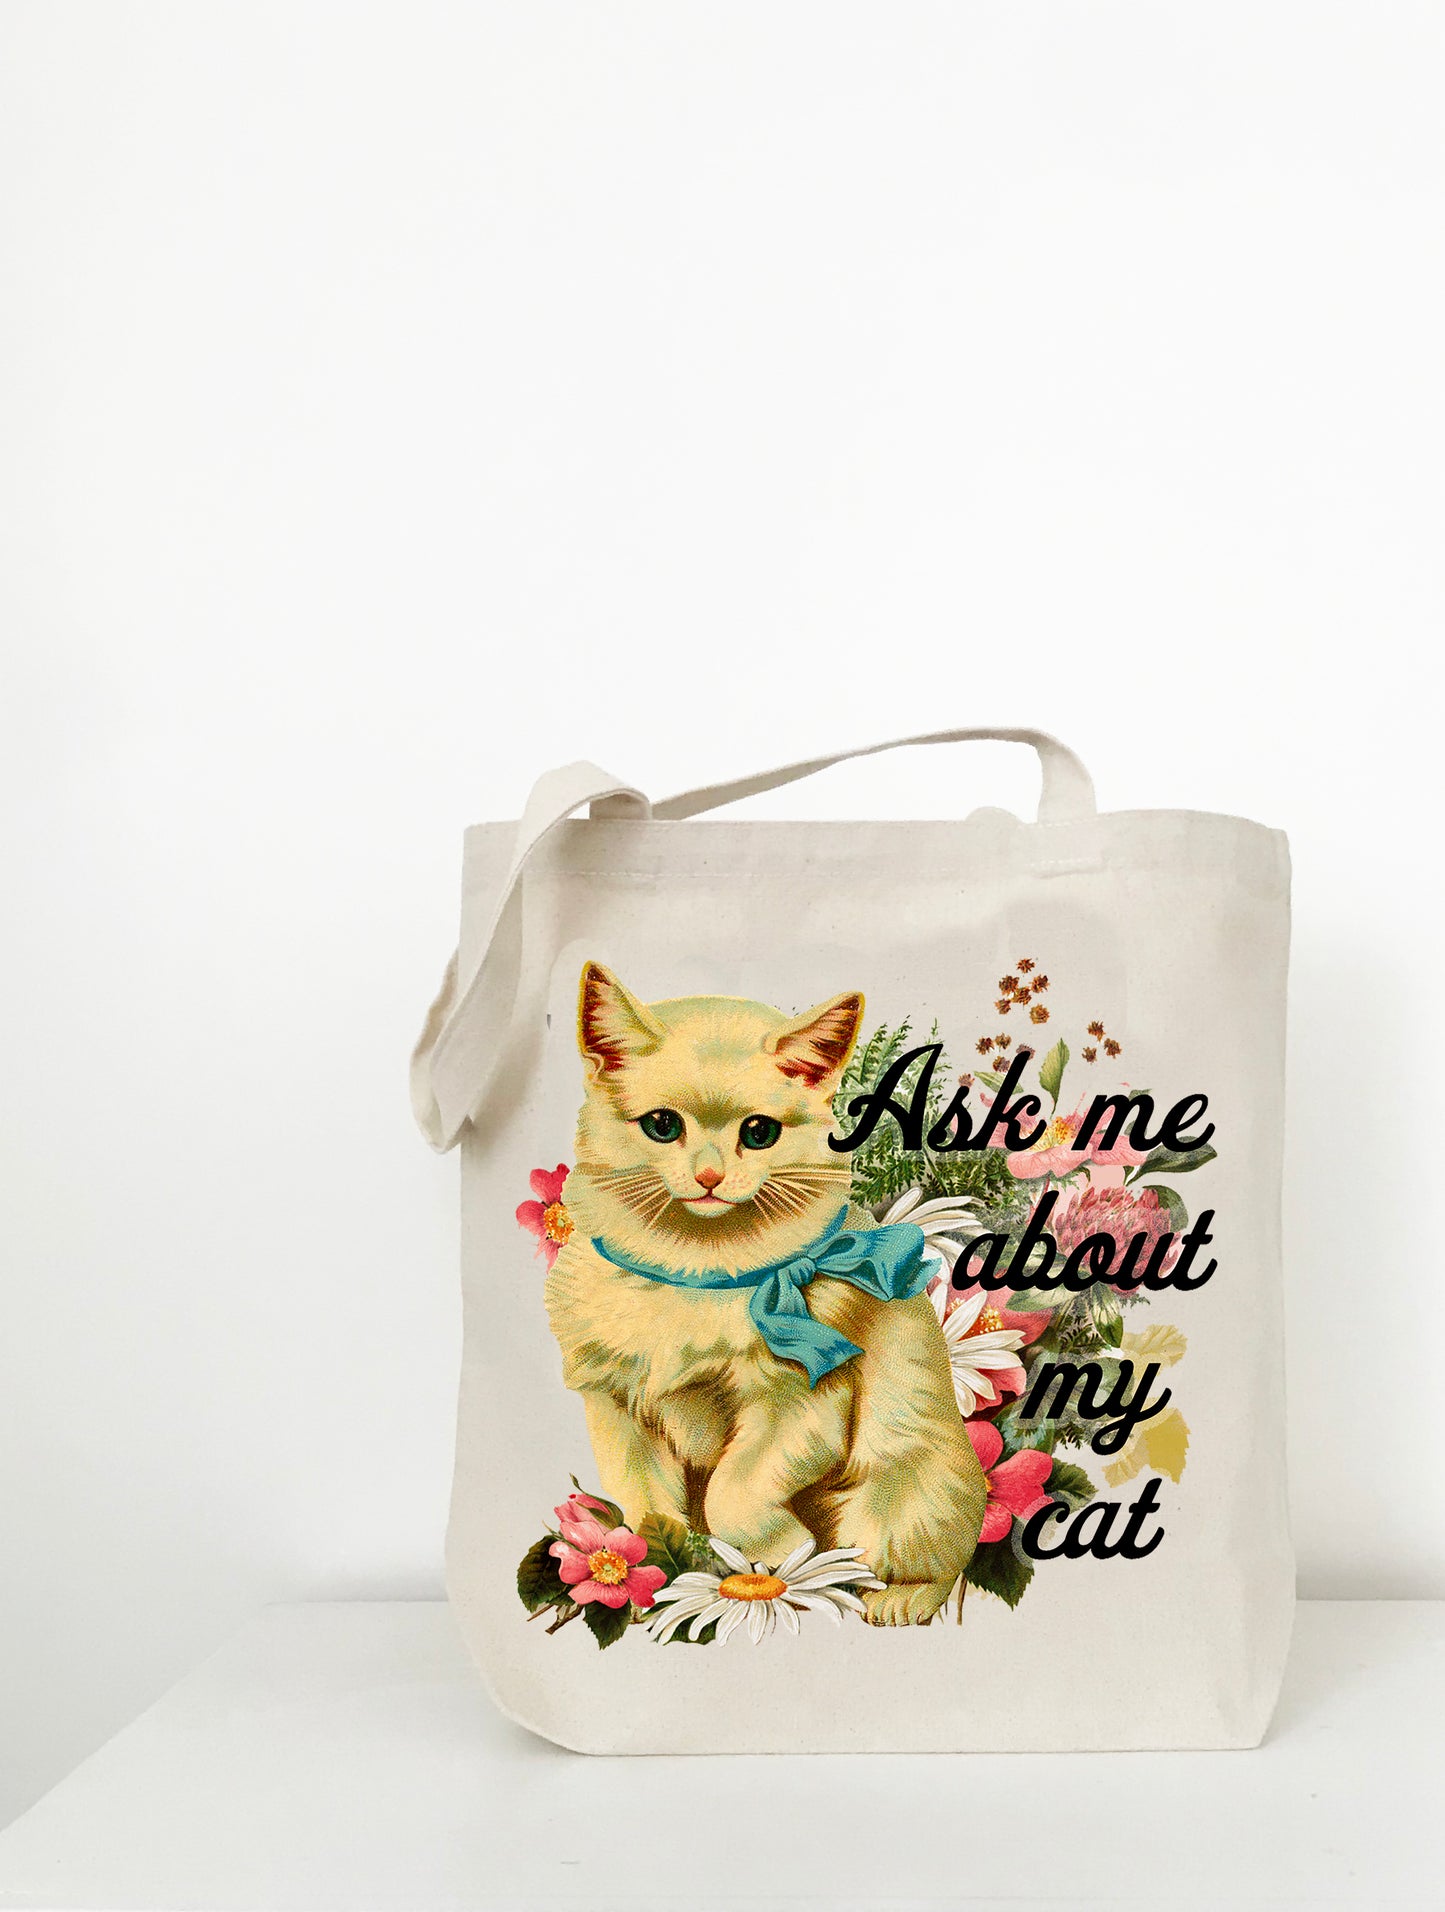 funny cat tote bag retro 80s 90s style cat with flowers tote bag reusable bag for shopping groceries cute cat mom kitty cat cat dad travel bag funny bag coin laundry montana ask me about my cat